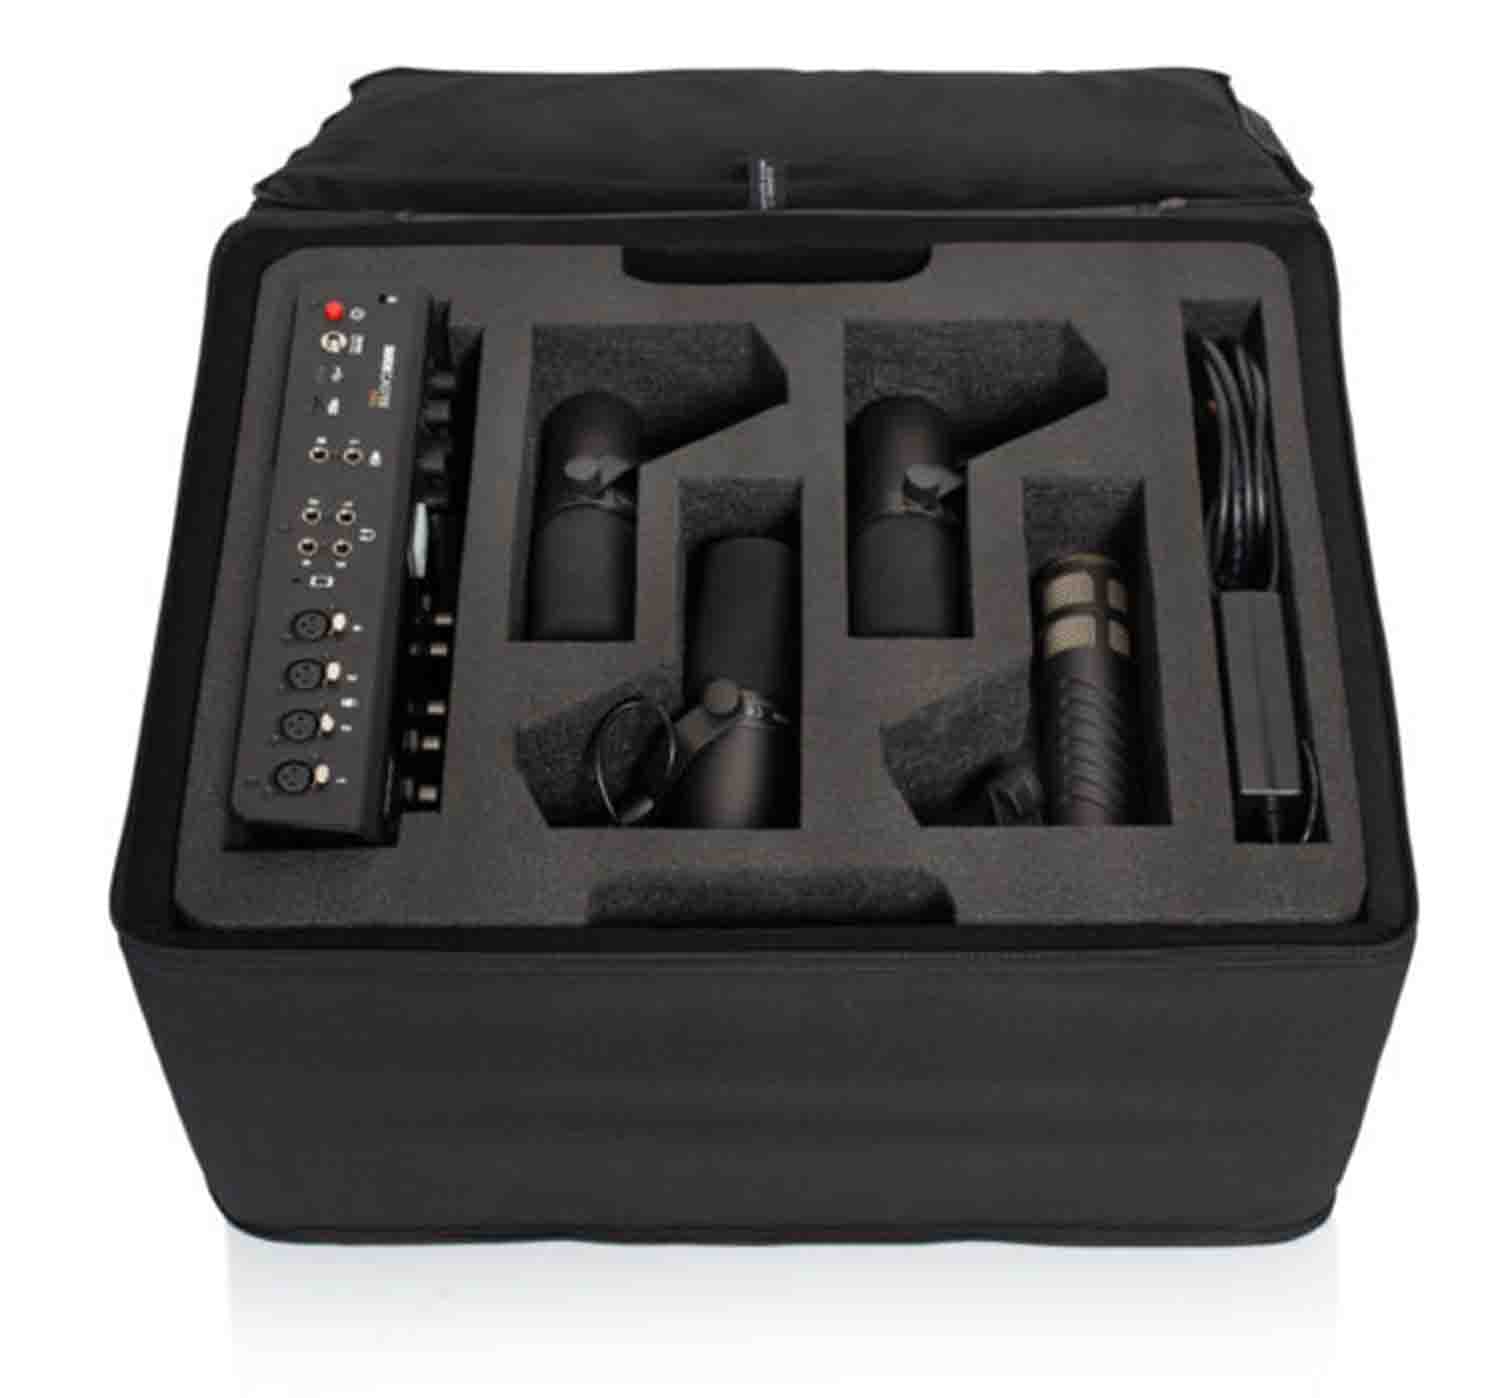 Gator Cases GL-RODECASTER4 Lightweight Case for RODECaster Pro Podcast Mixer, Four Headphones and Four Mics - Hollywood DJ